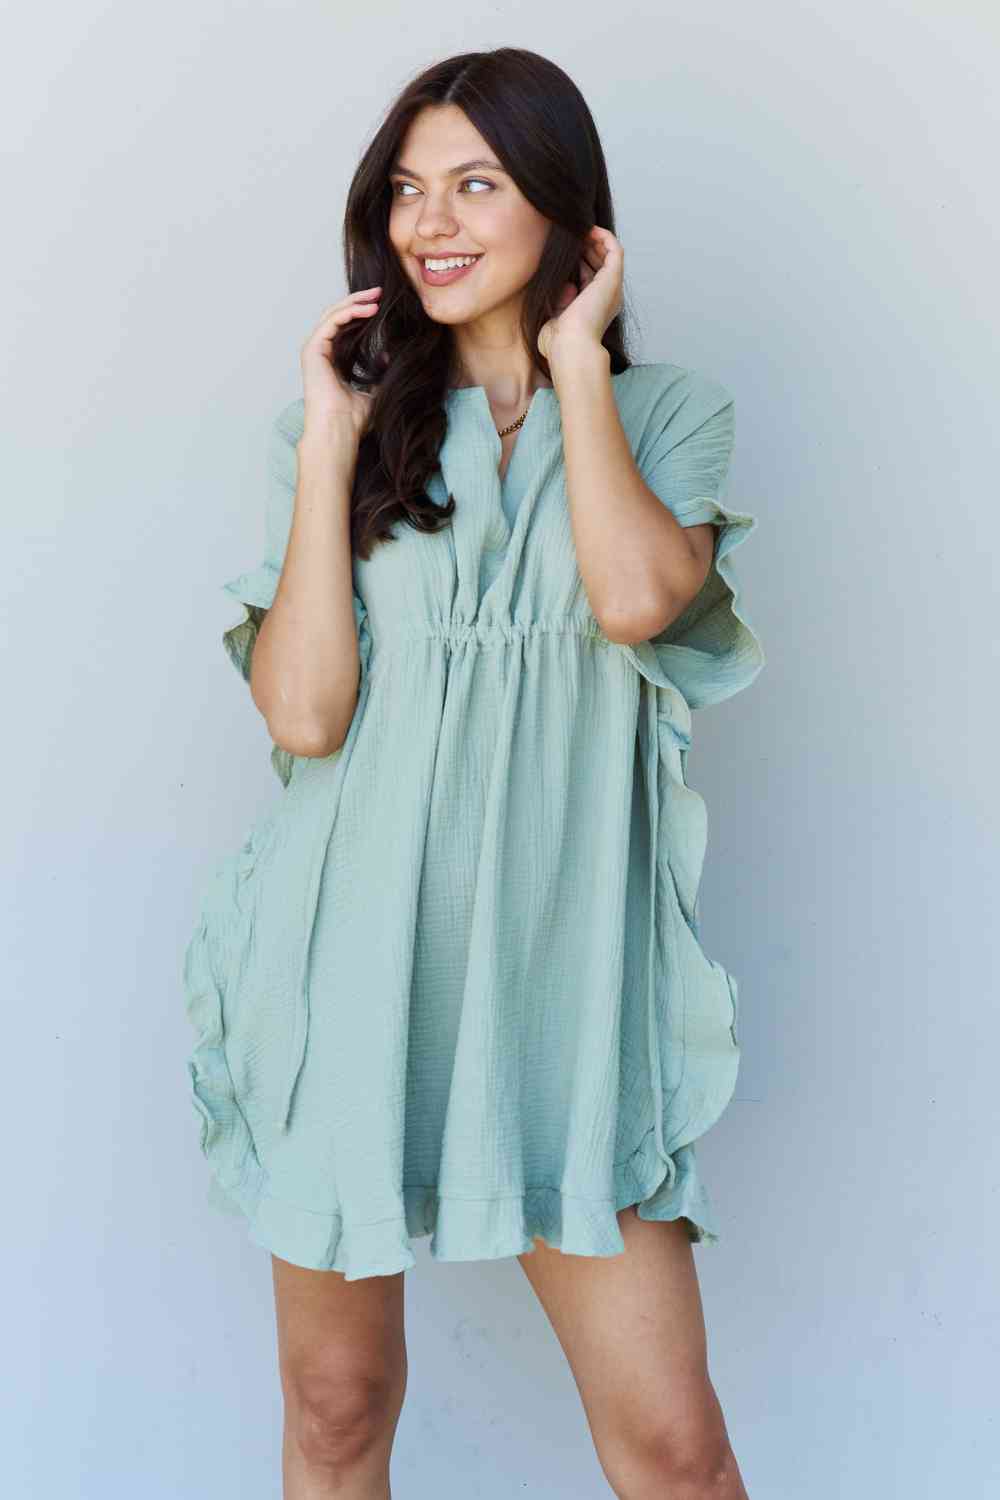 Ninexis Out Of Time Full Size Ruffle Hem Dress with Drawstring Waistband in Light Sage 7